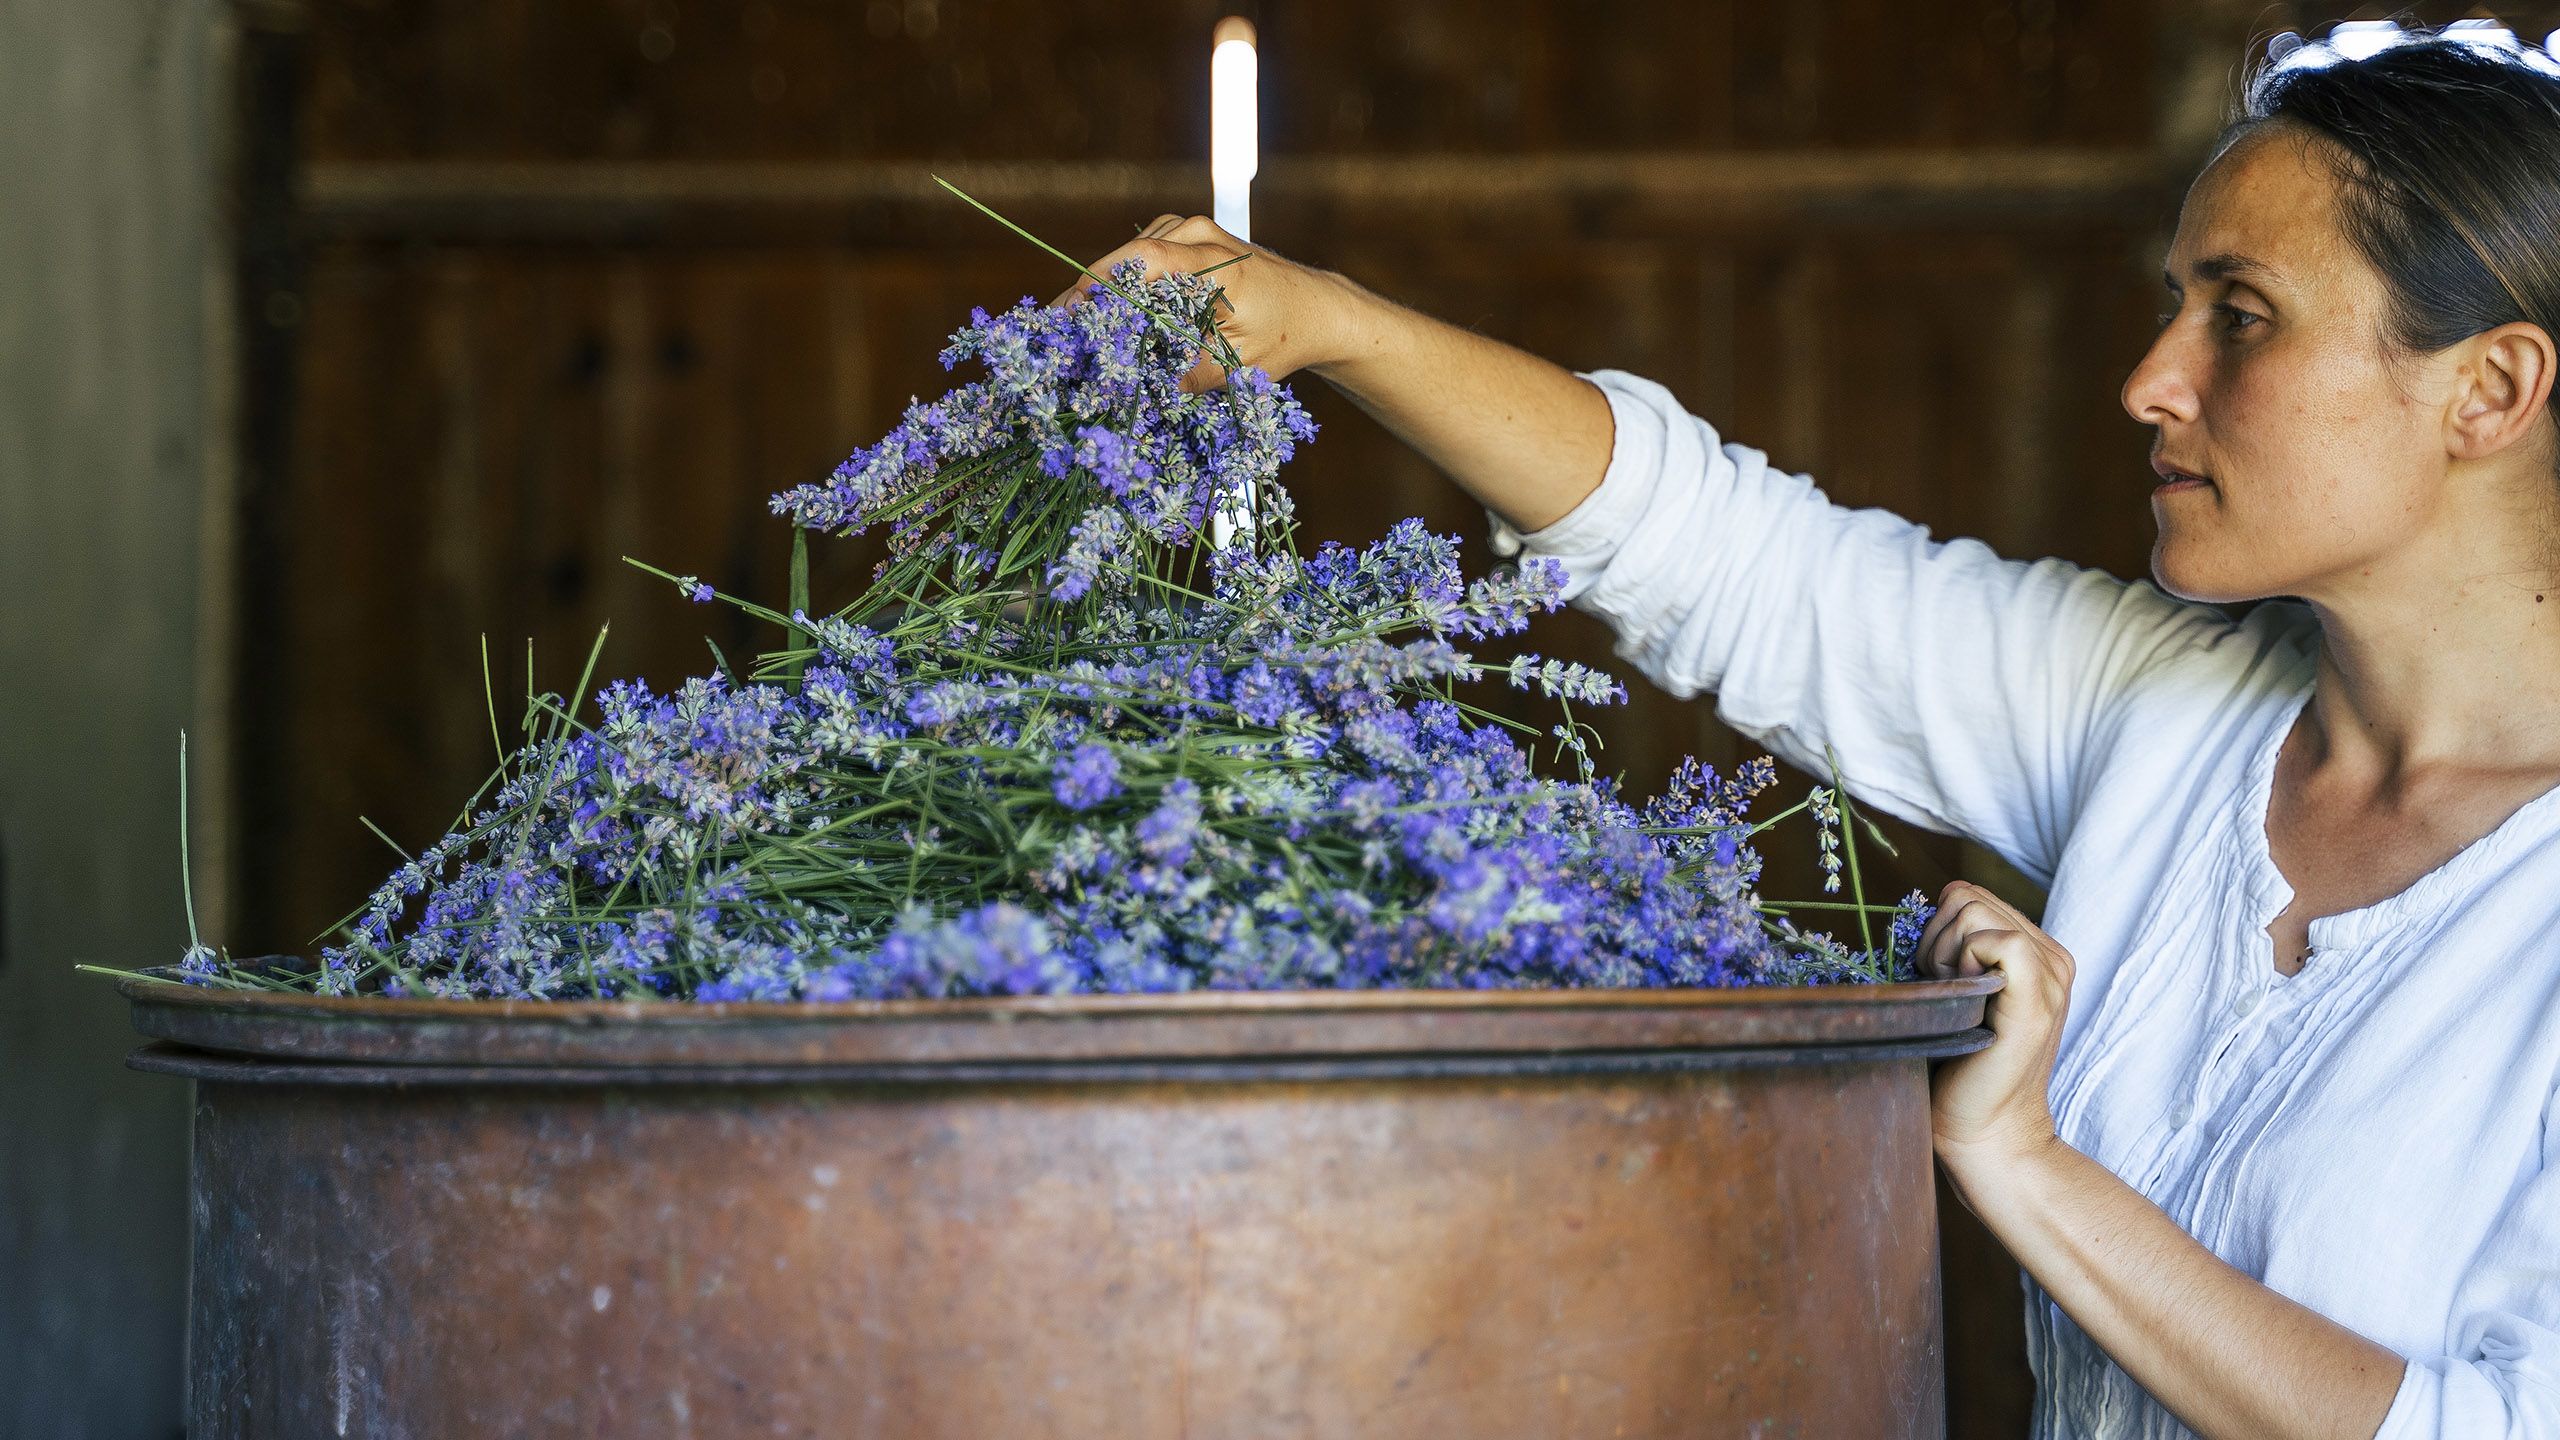 A women with a large pile of lavender in a metal container